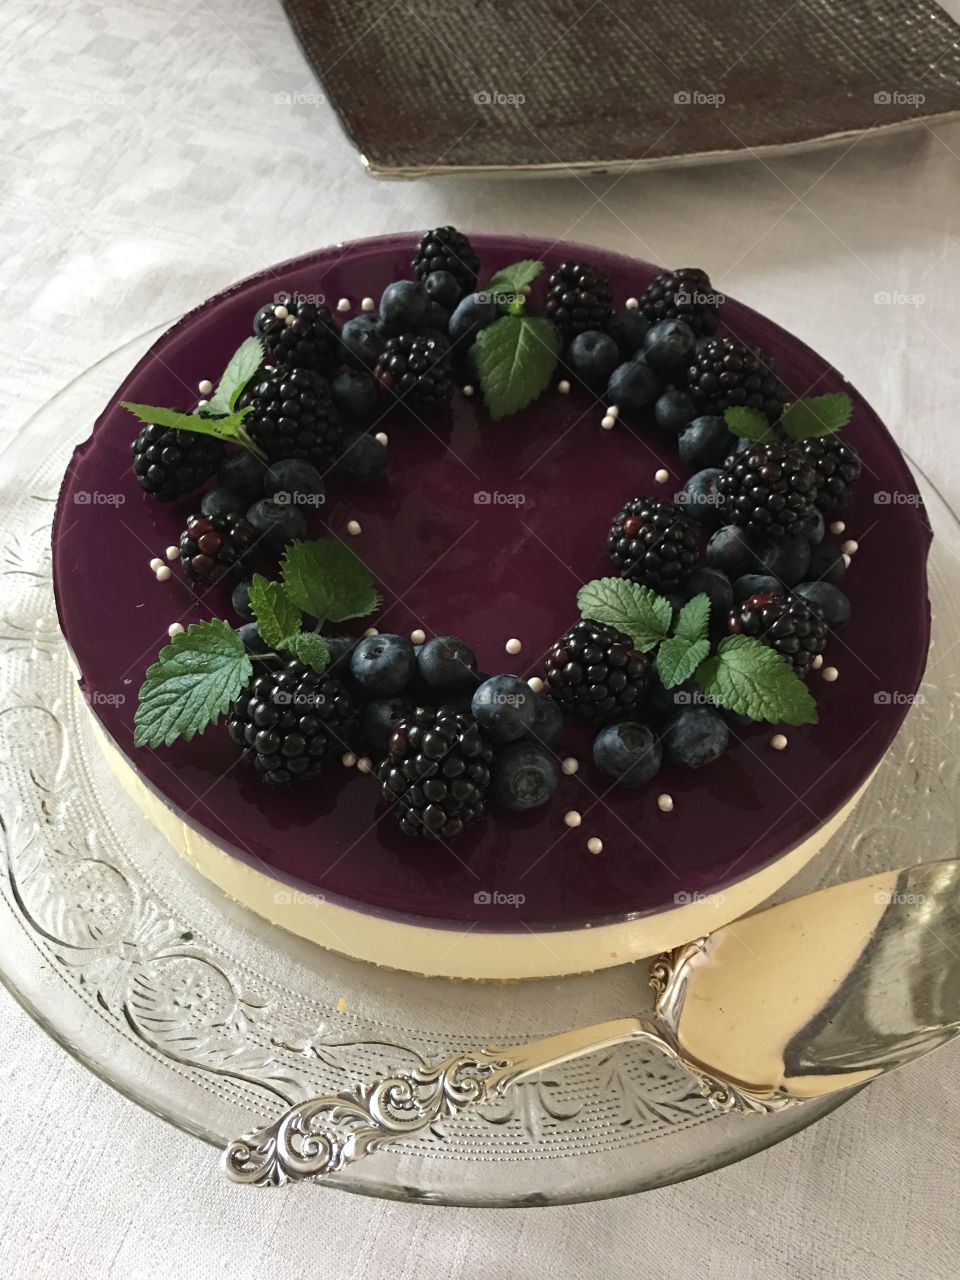 My "famous" cheesecake